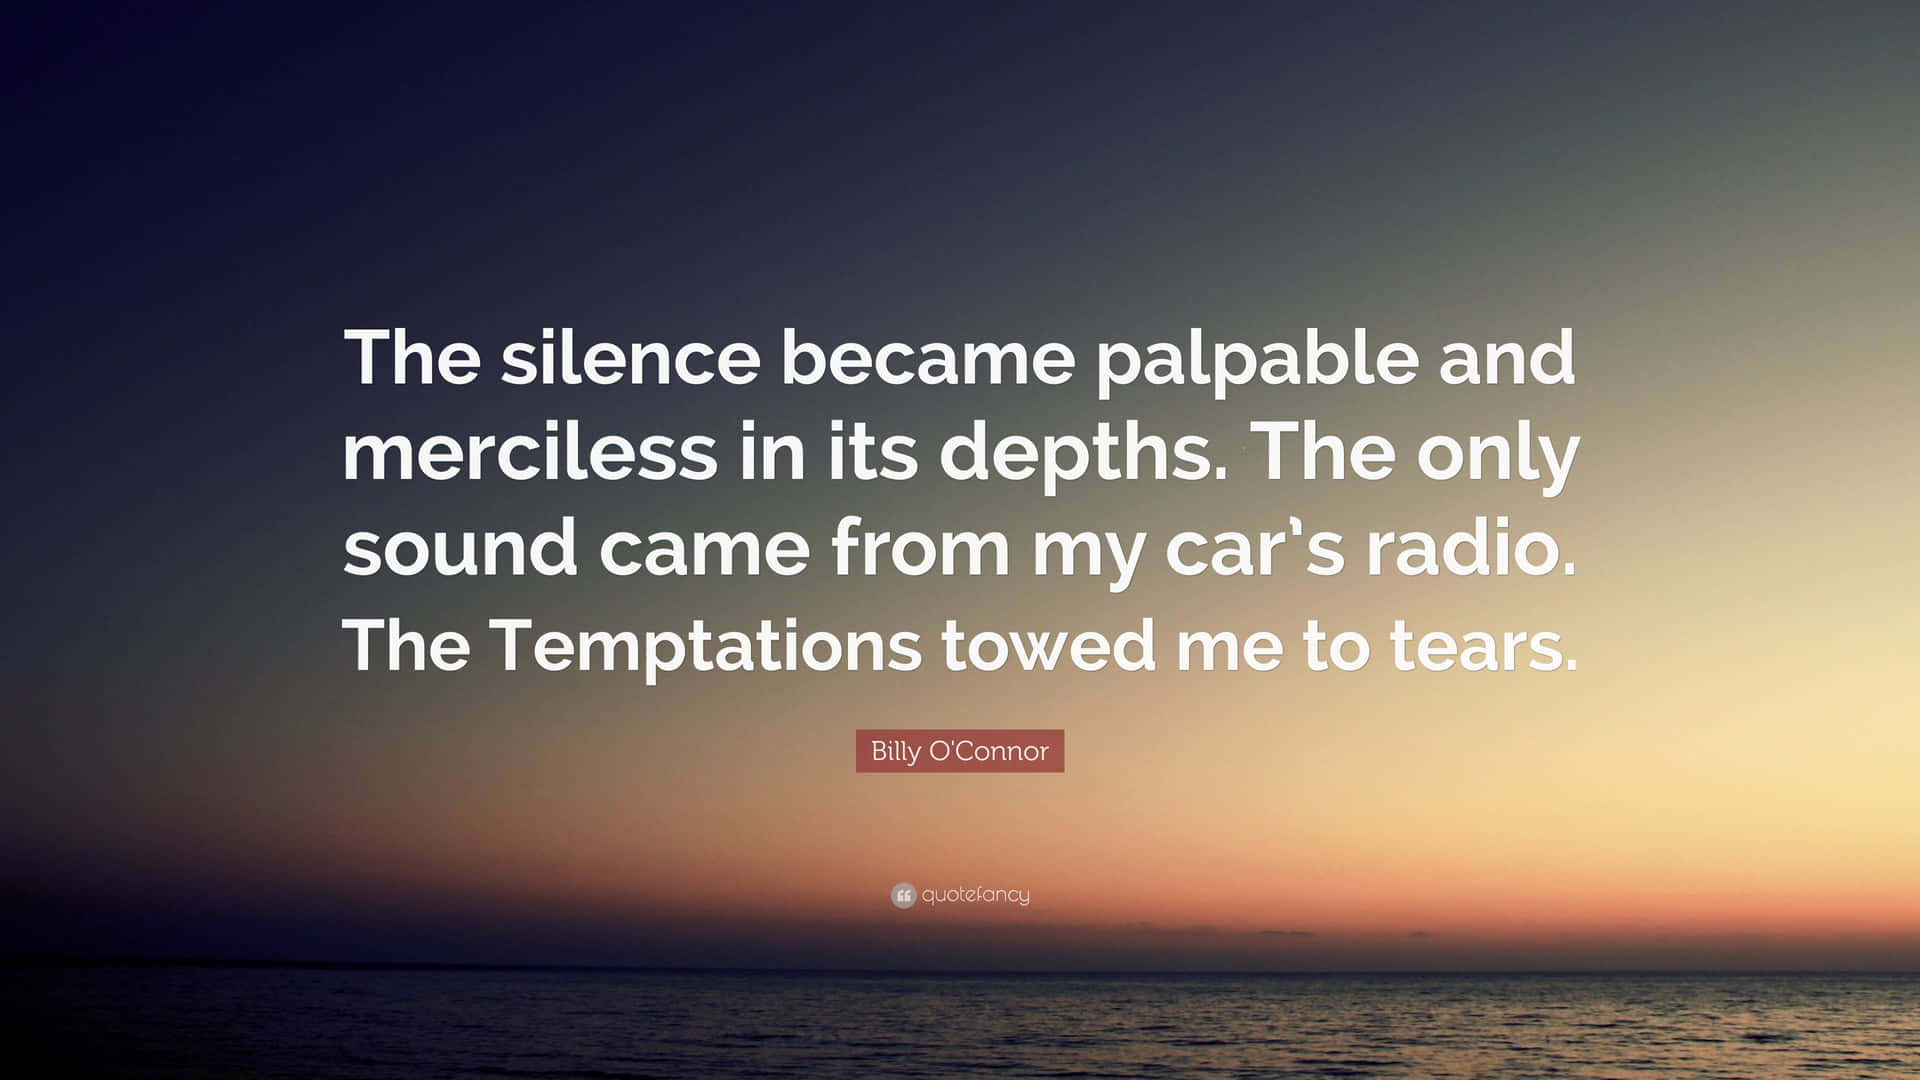 Silence Became Palpable Quote Wallpaper